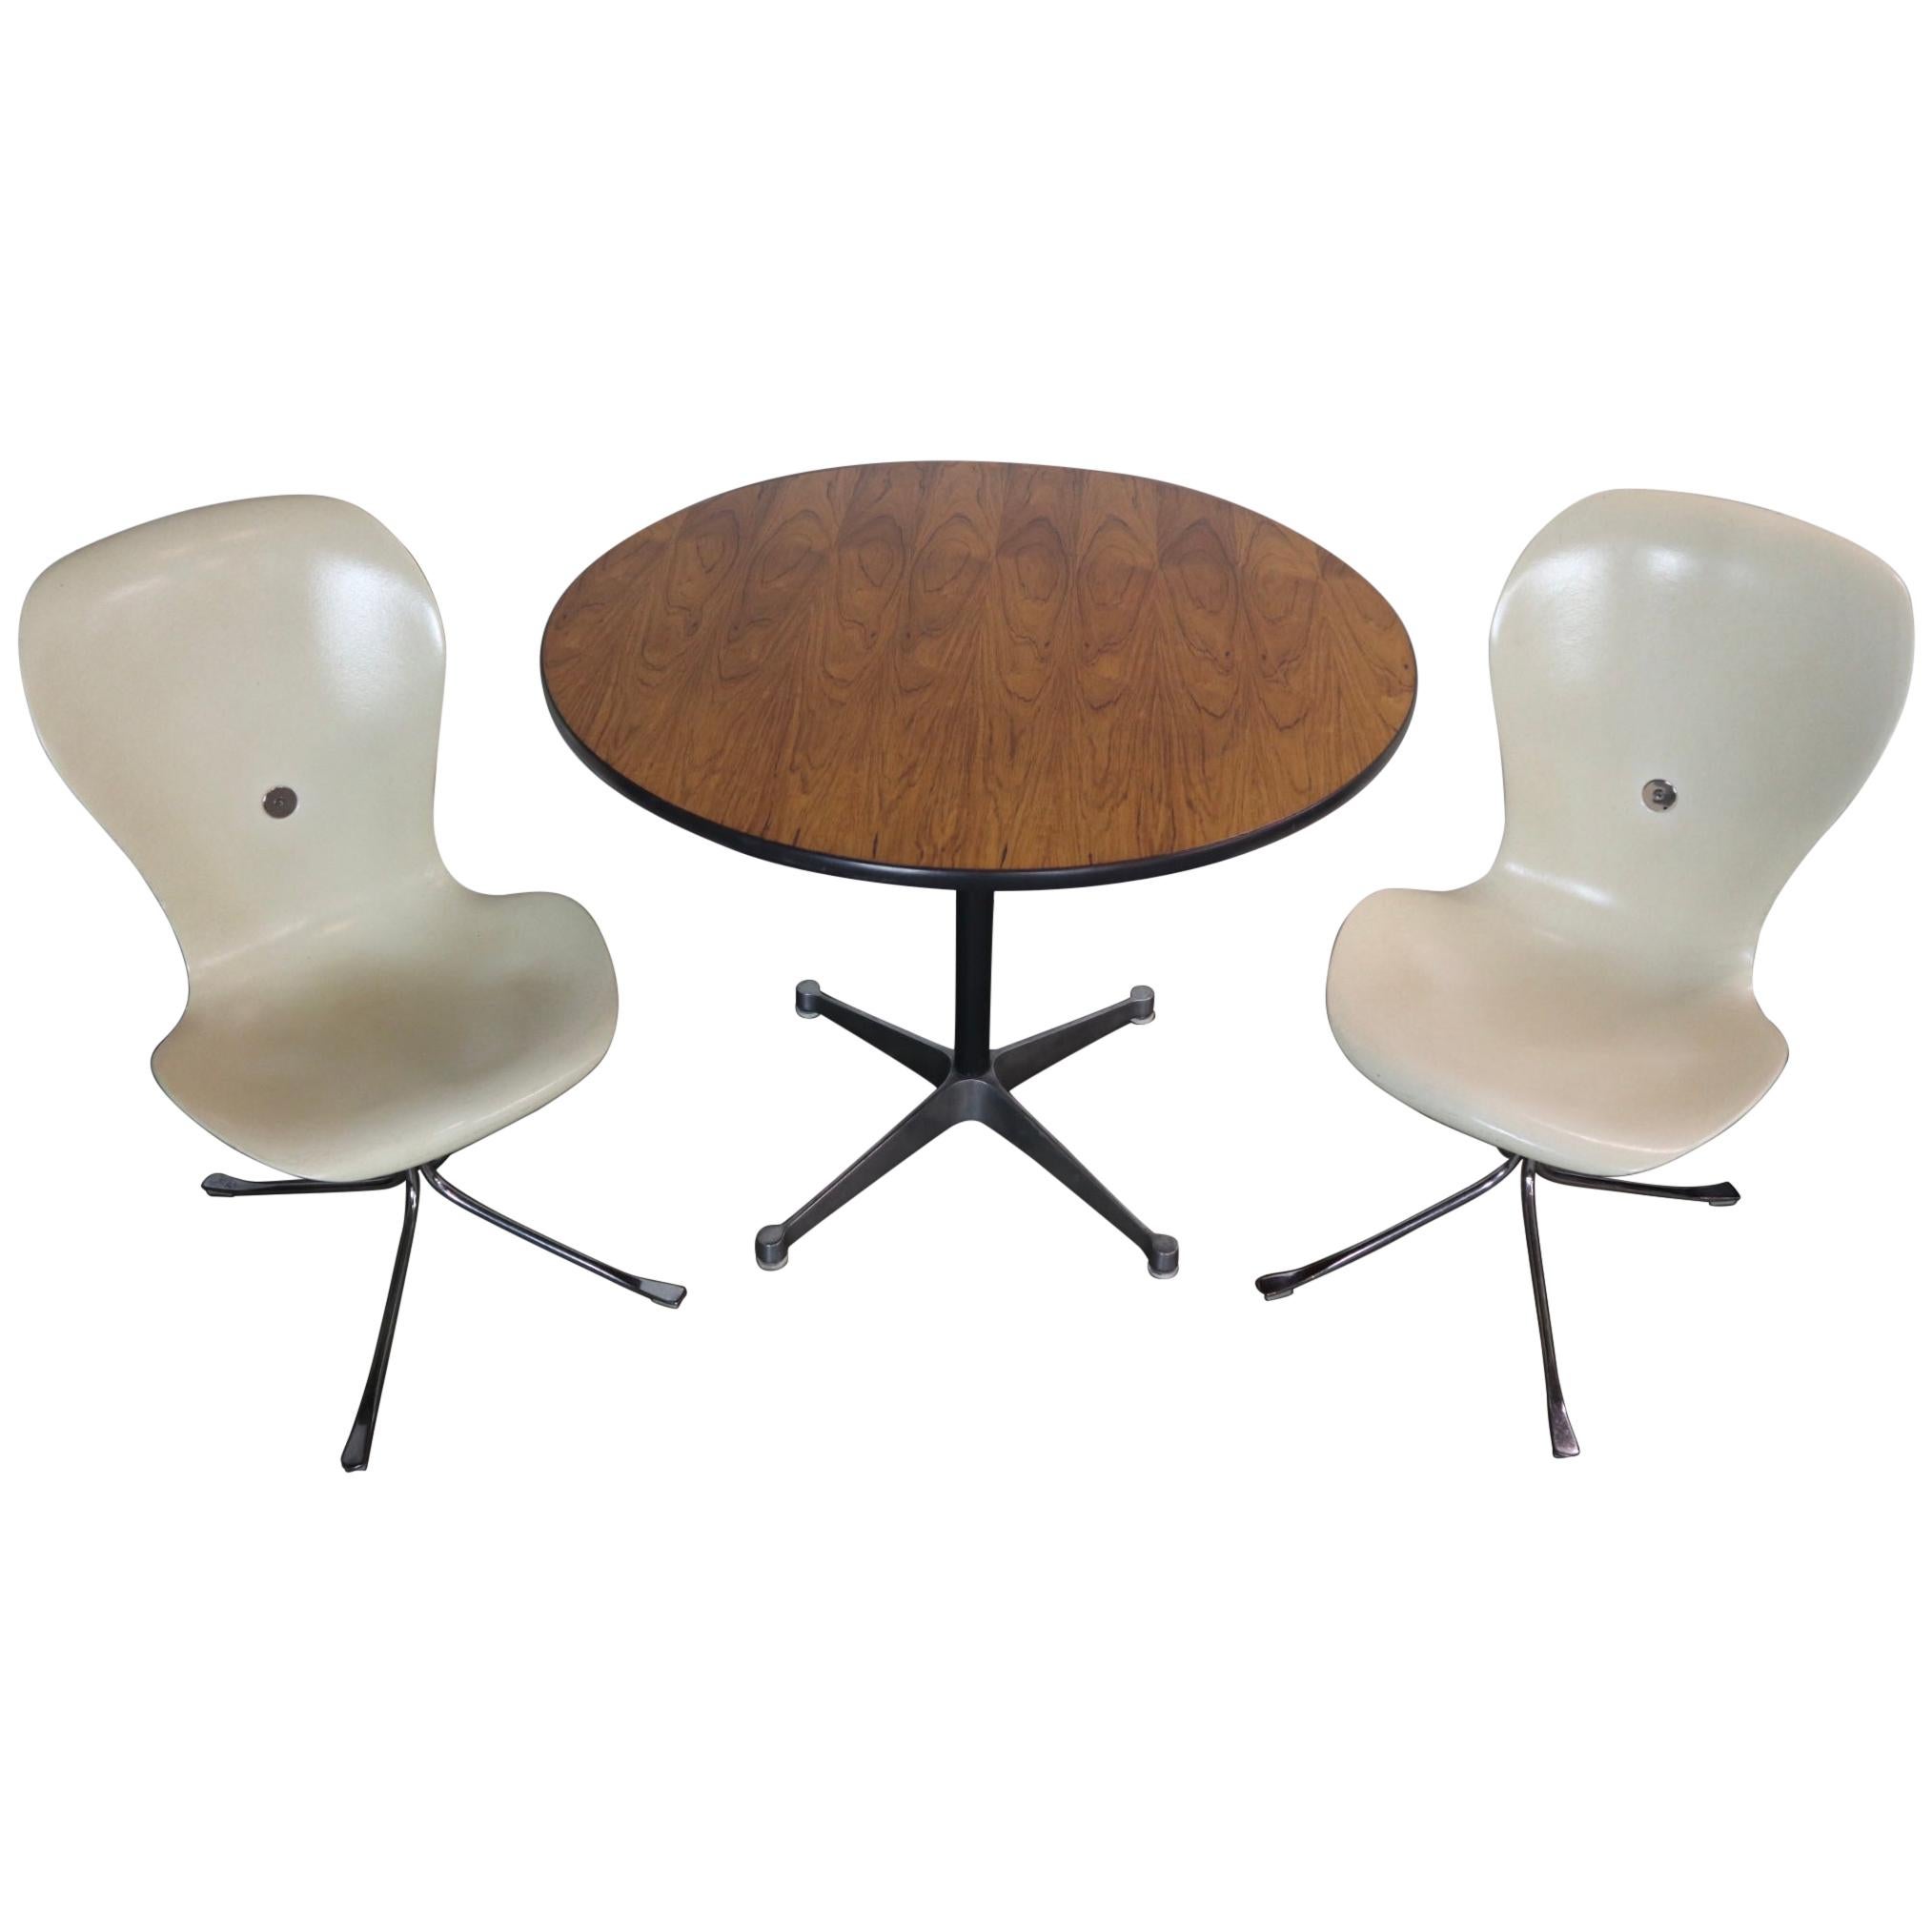 Unique Breakfast Cafe Style Dining Set Charles & Ray Eames and Gideon Kramer